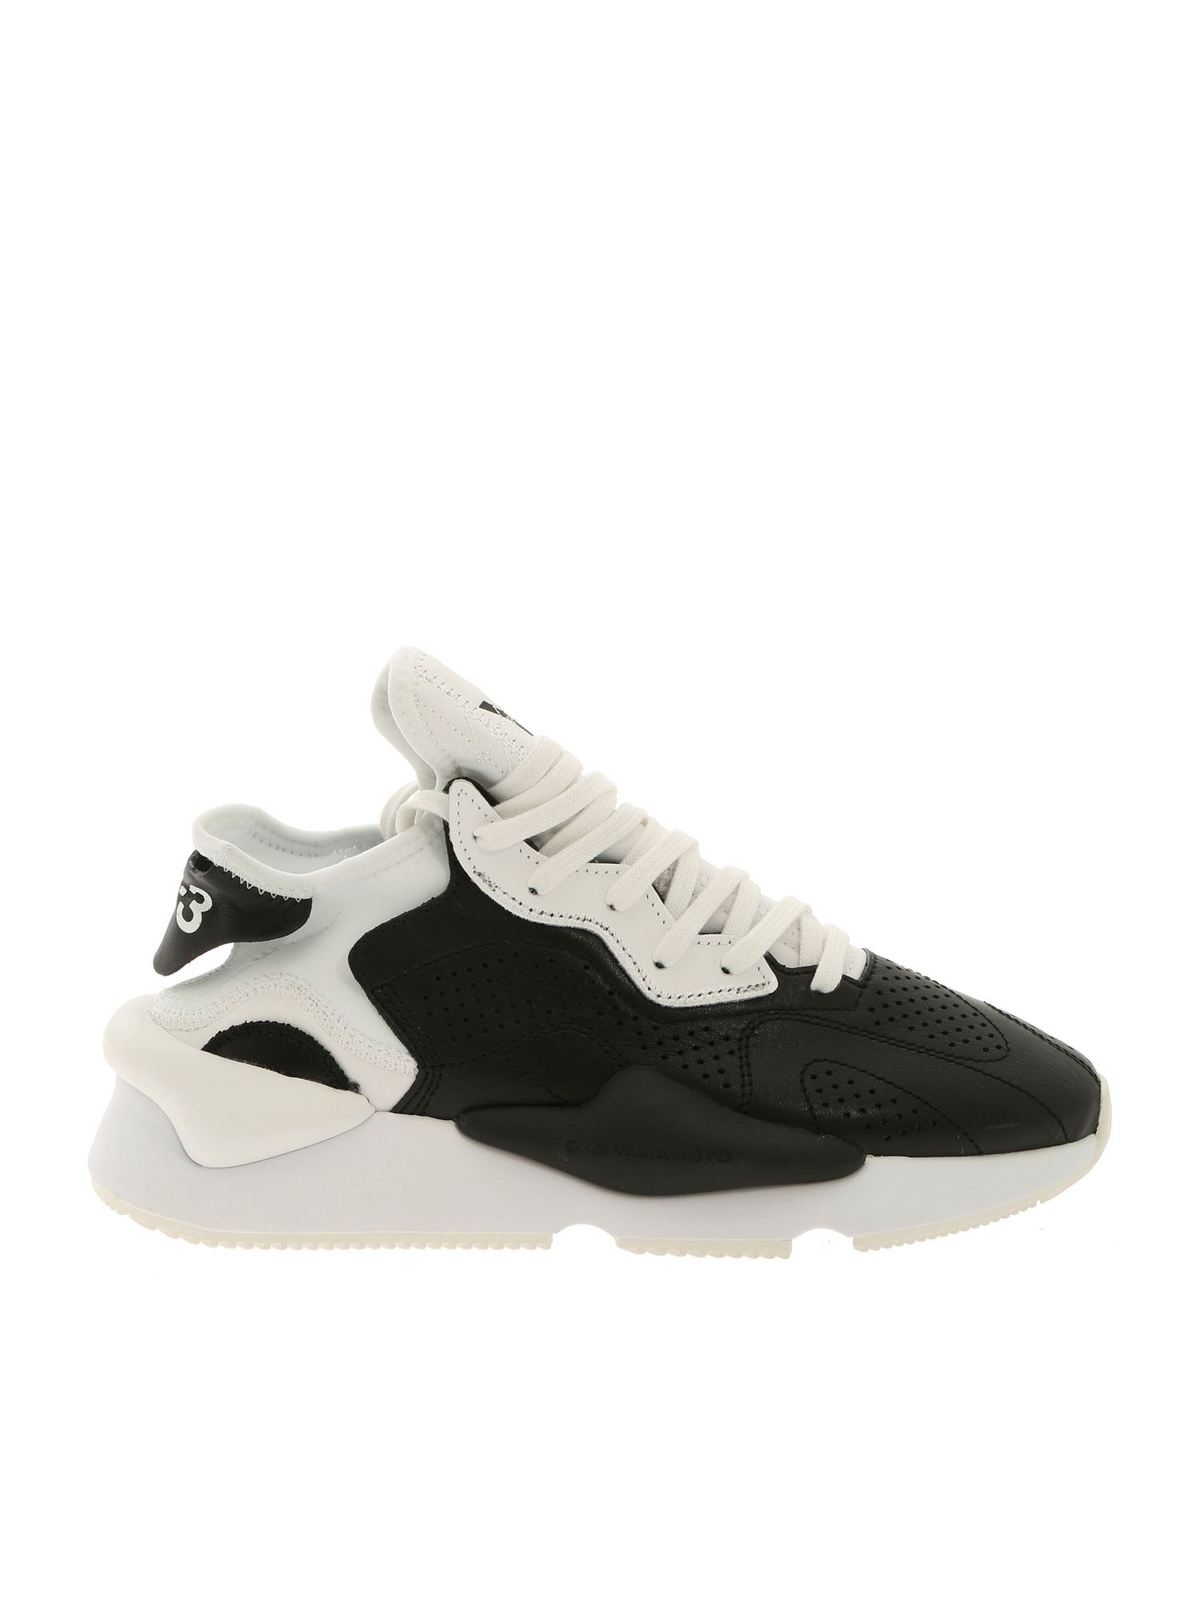 y3 white trainers